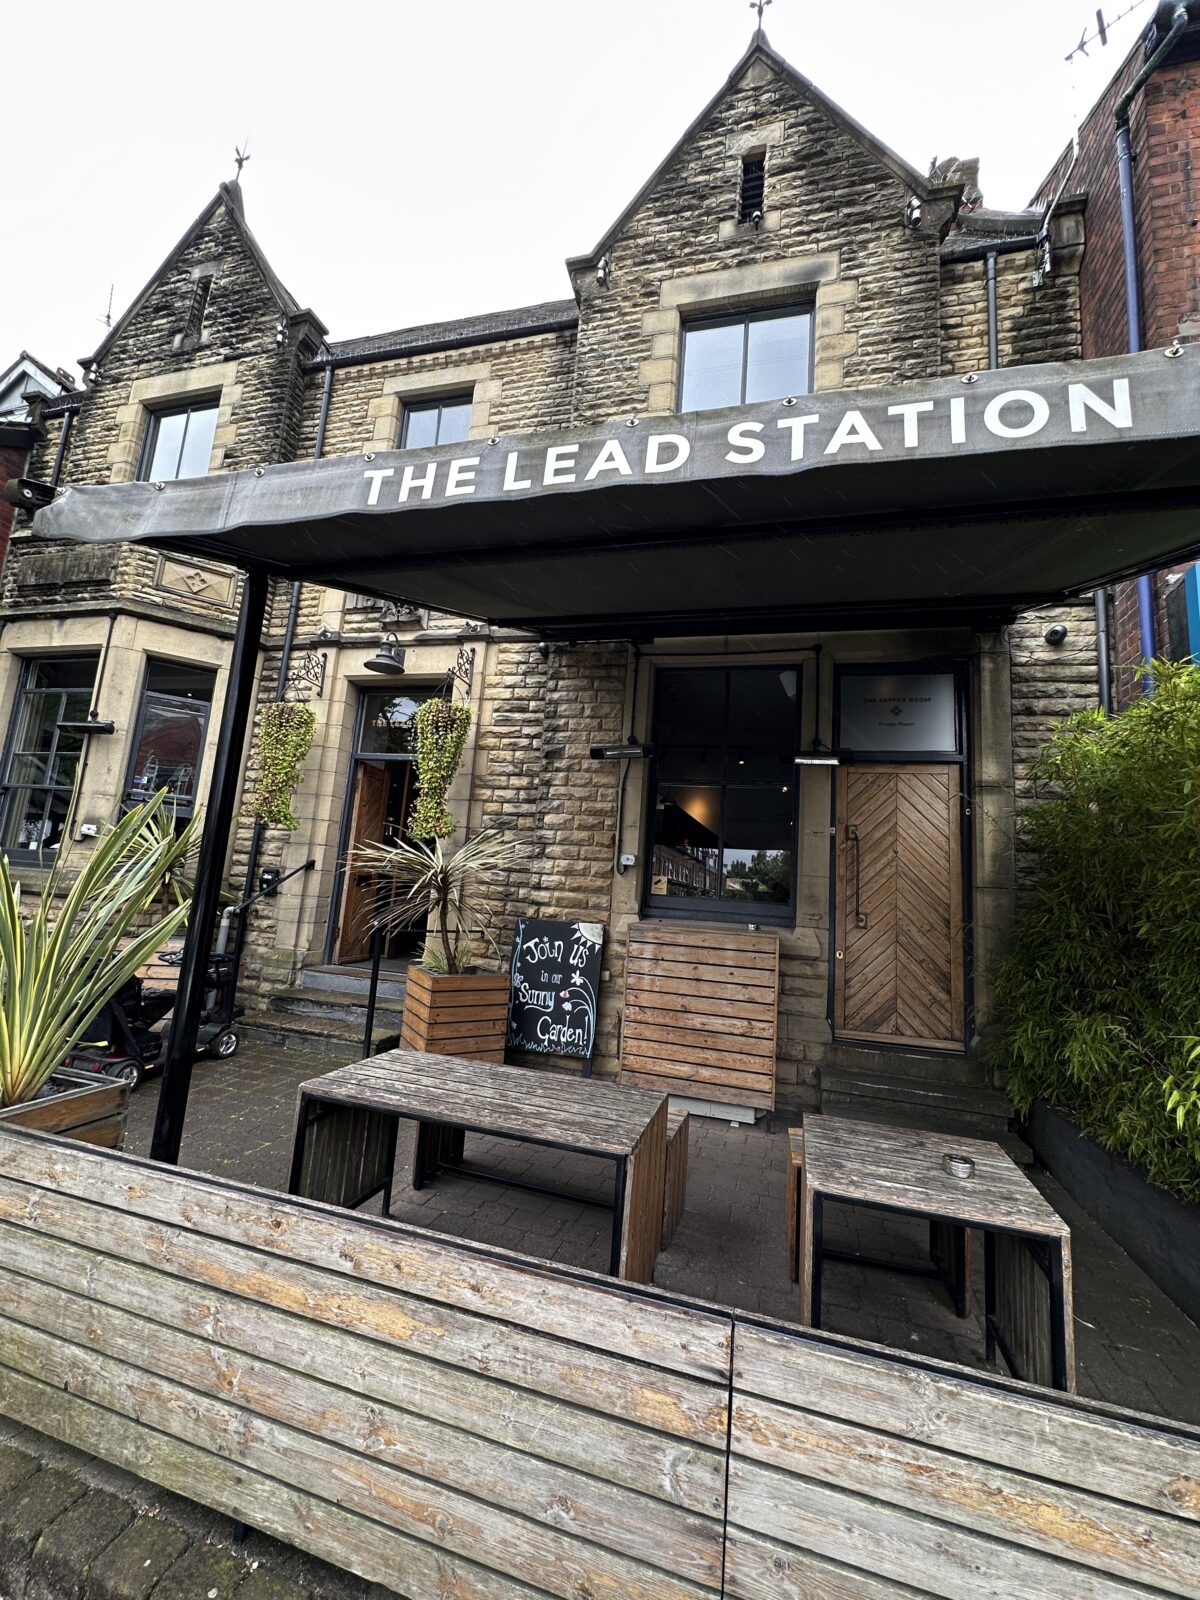 The Lead Station in Chorlton. Credit: The Manc Group